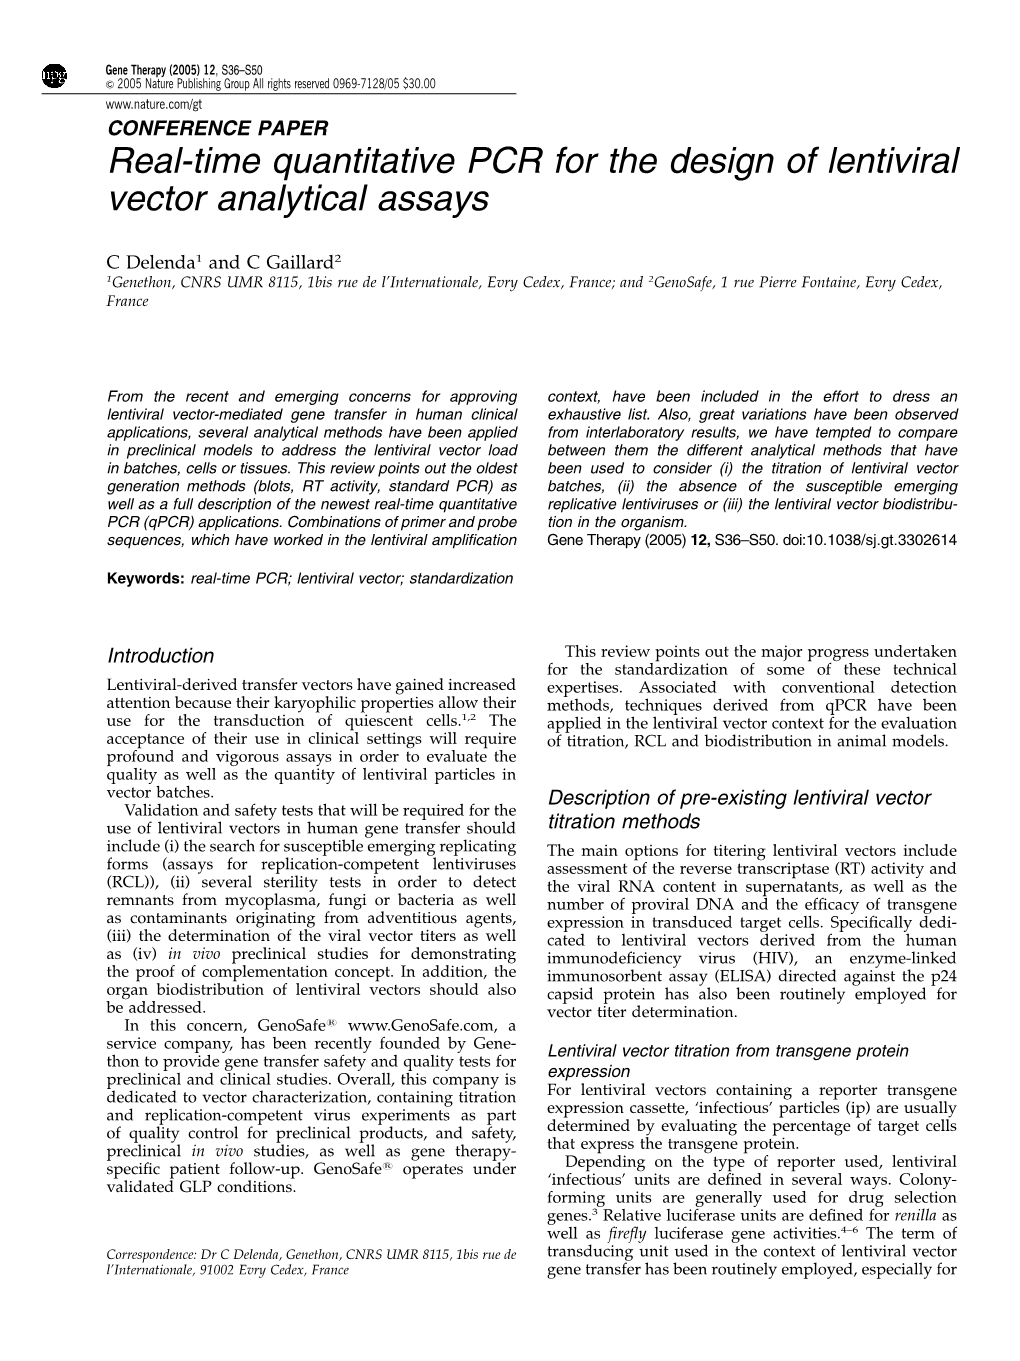 Real-Time Quantitative PCR for the Design of Lentiviral Vector Analytical Assays